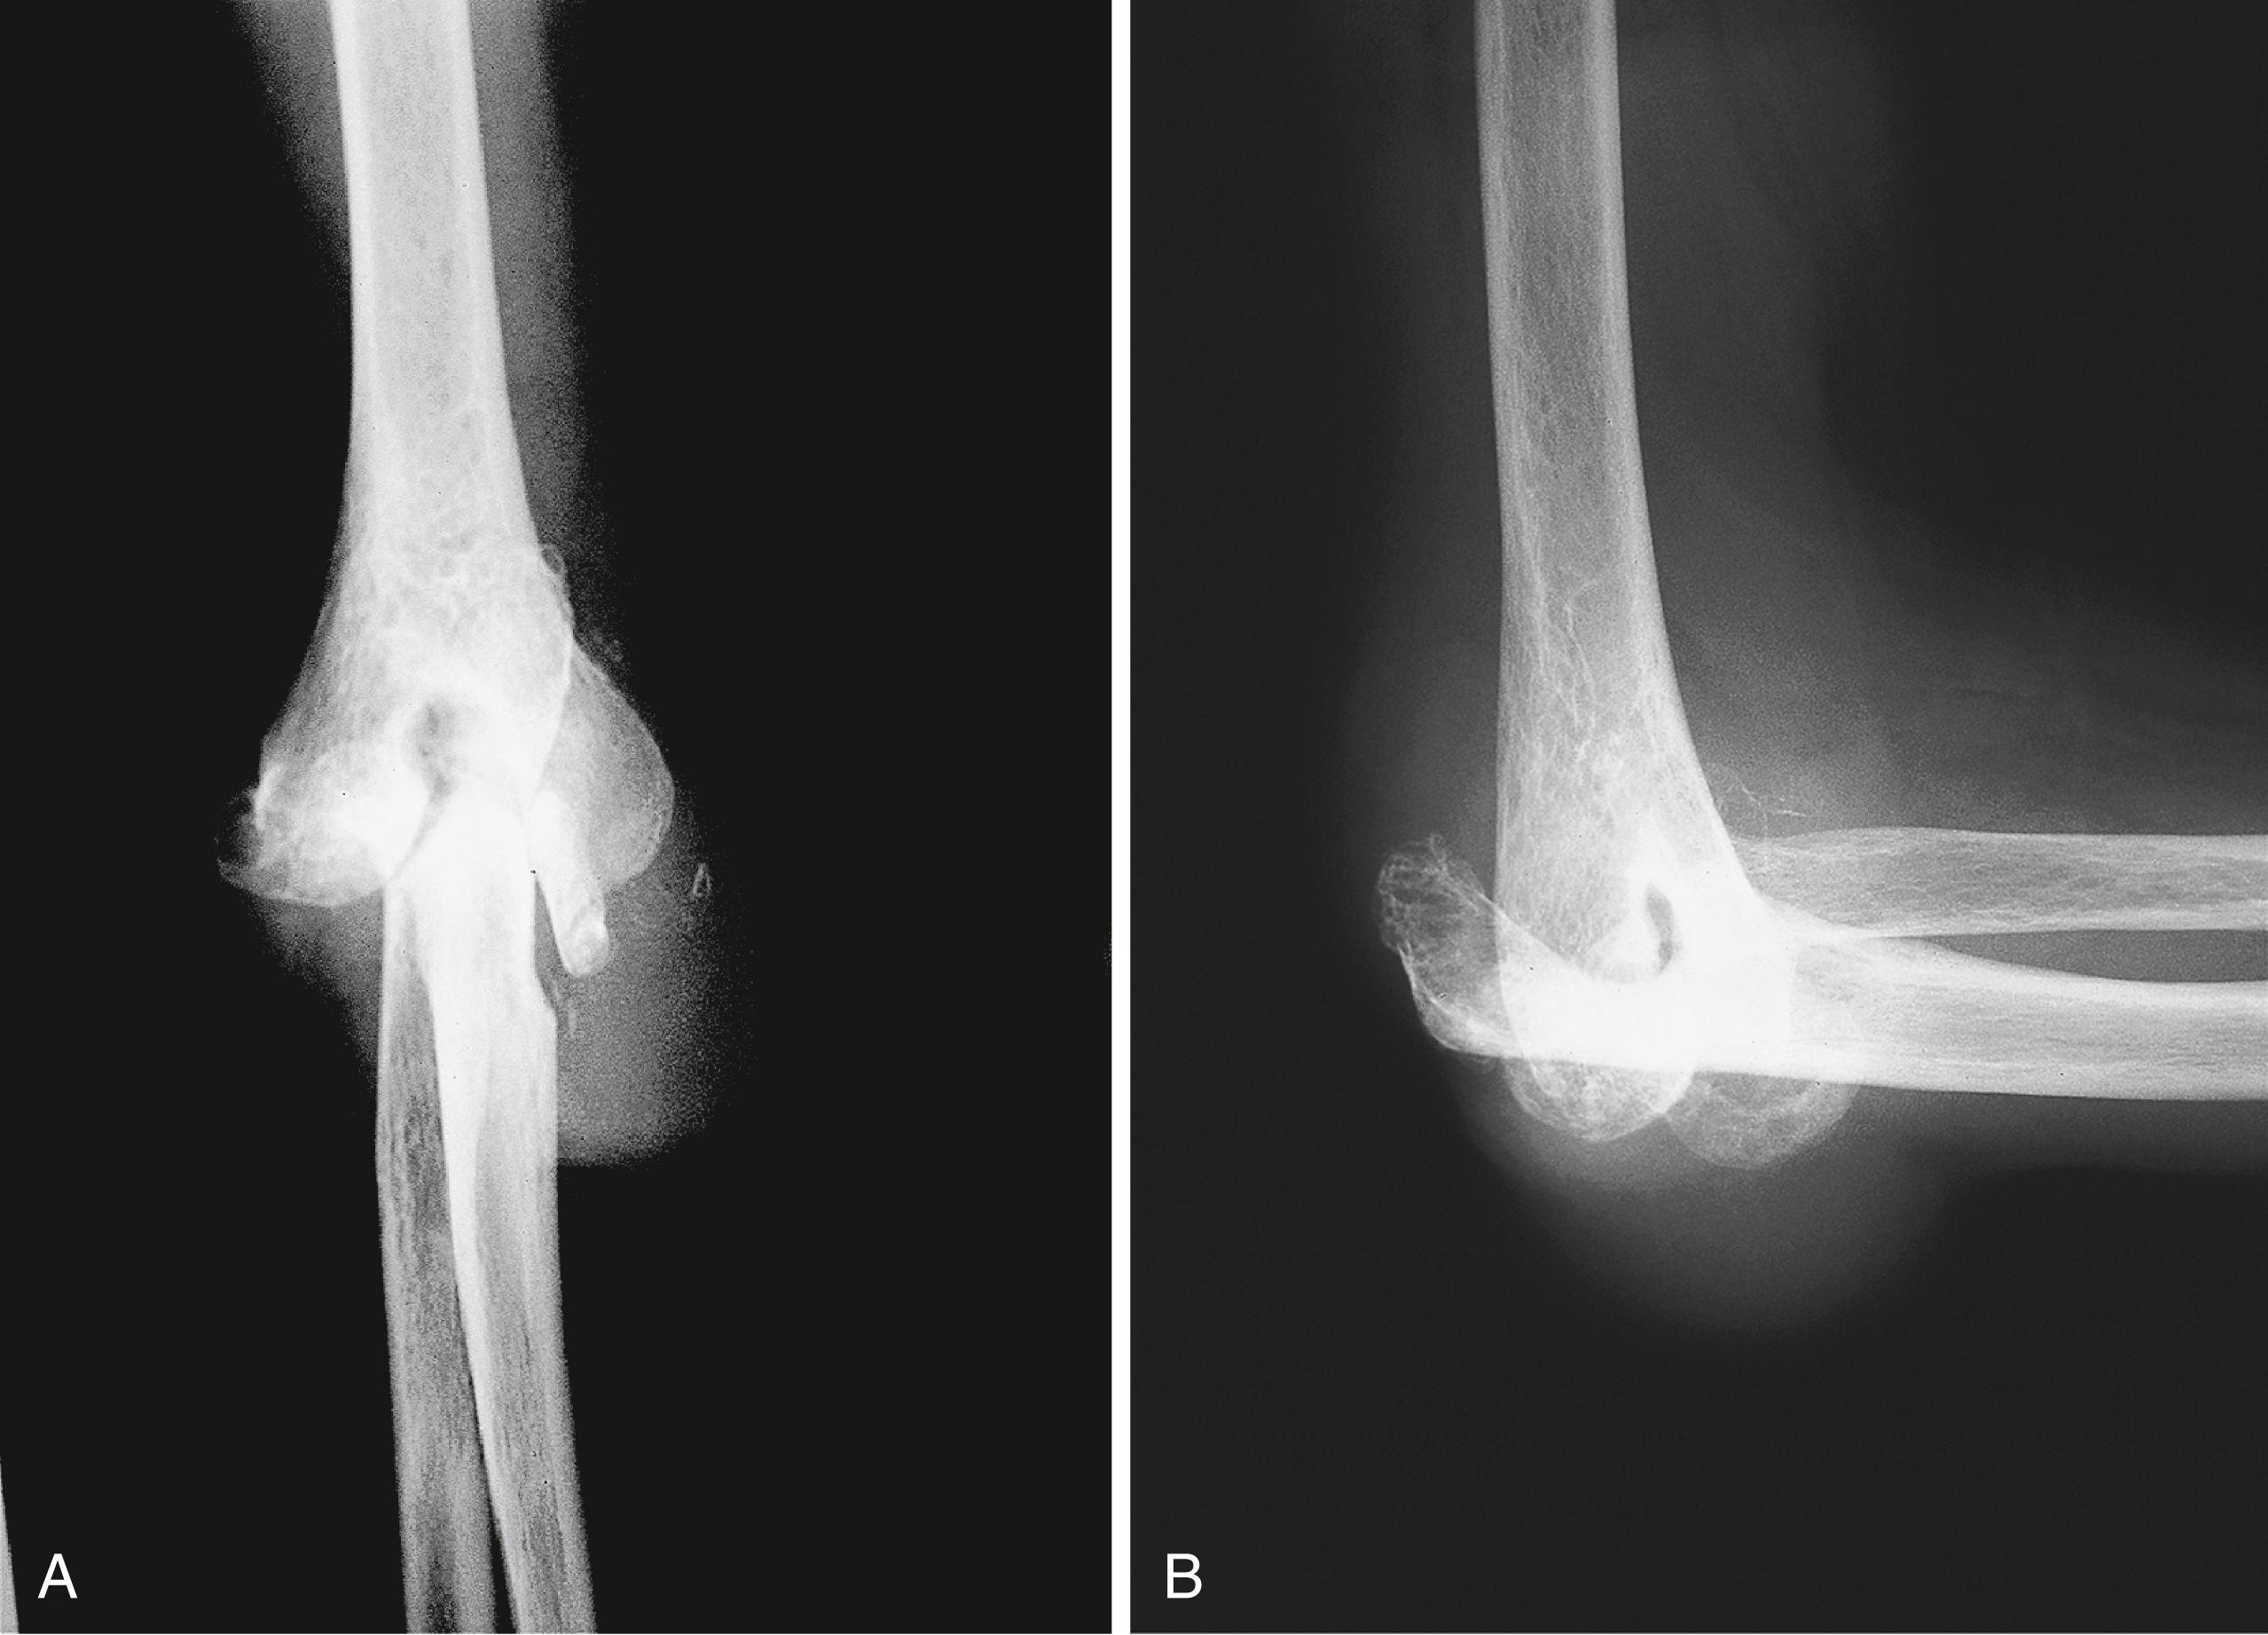 Fig. 27.2, Anteroposterior (A) and lateral (B) radiographs of a severe stage IV rheumatoid elbow. The loss of bone support and ligamentous integrity leads to gross joint instability.